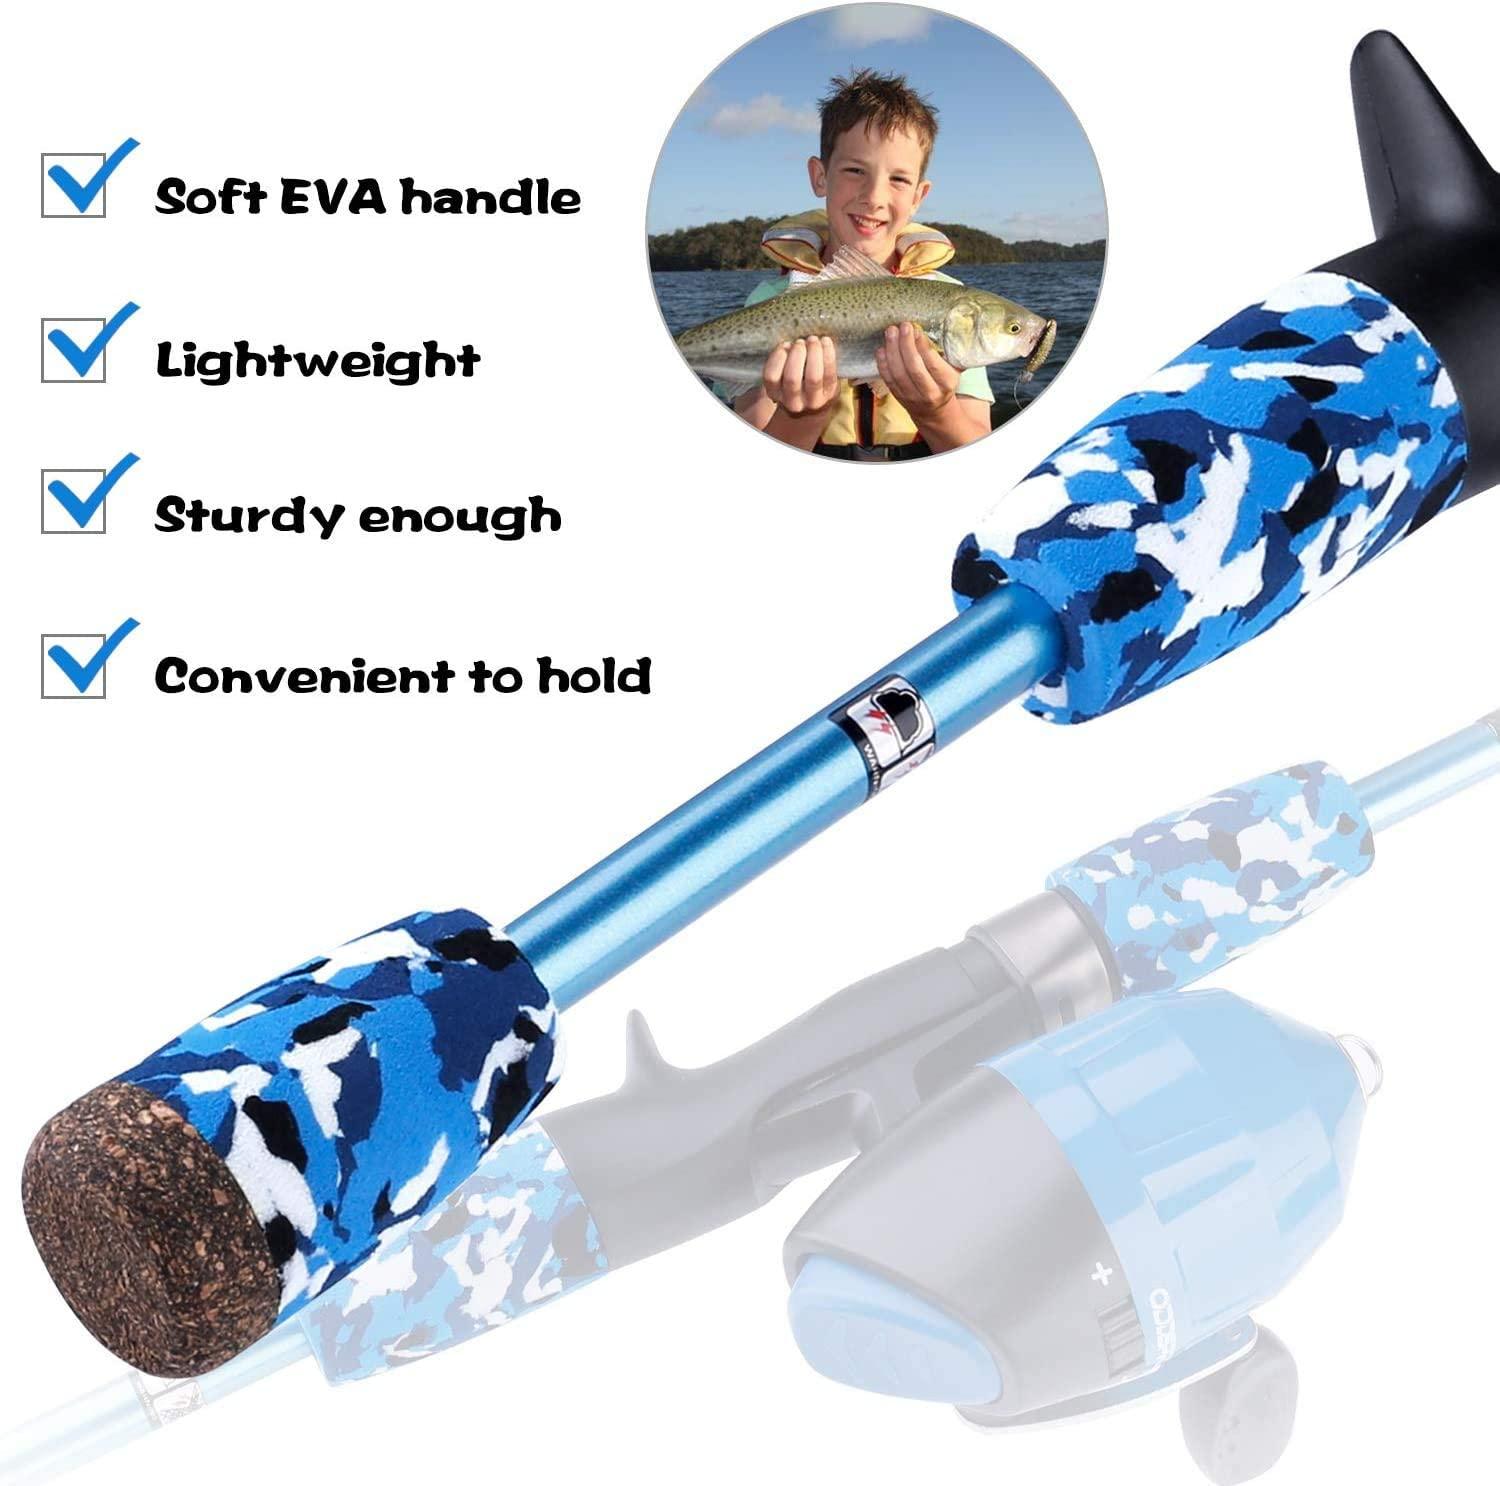 ODDSPRO Kids Fishing Pole - Kids Fishing Starter Kit - with Tackle Box, Reel,  Practice Plug, Beginner's Guide and Travel Bag for Boys, Girls Blue 1.2M  3.94Ft